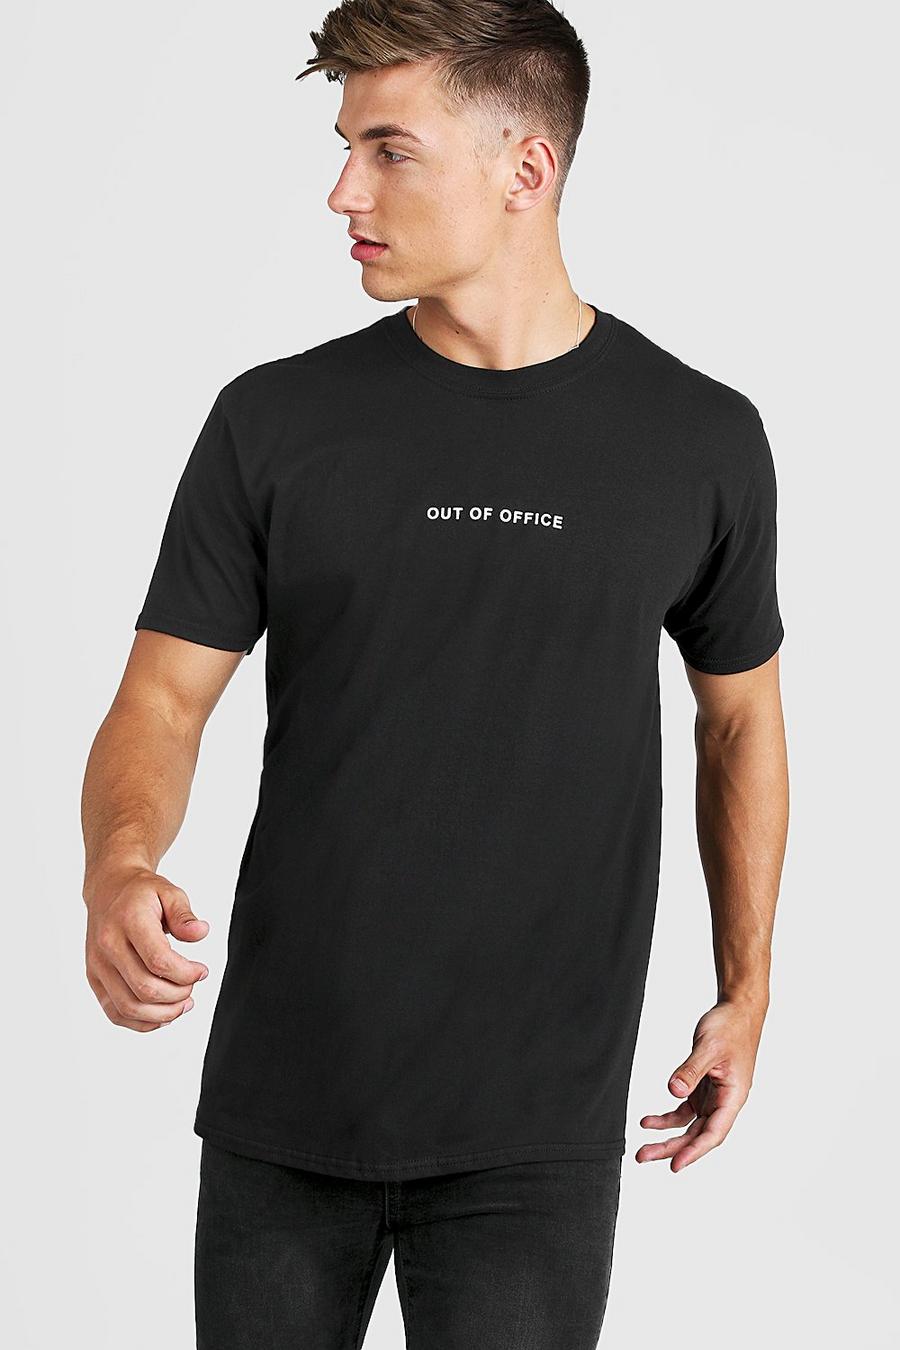 Black Loose Fit Out Of Office Graphic T-Shirt image number 1